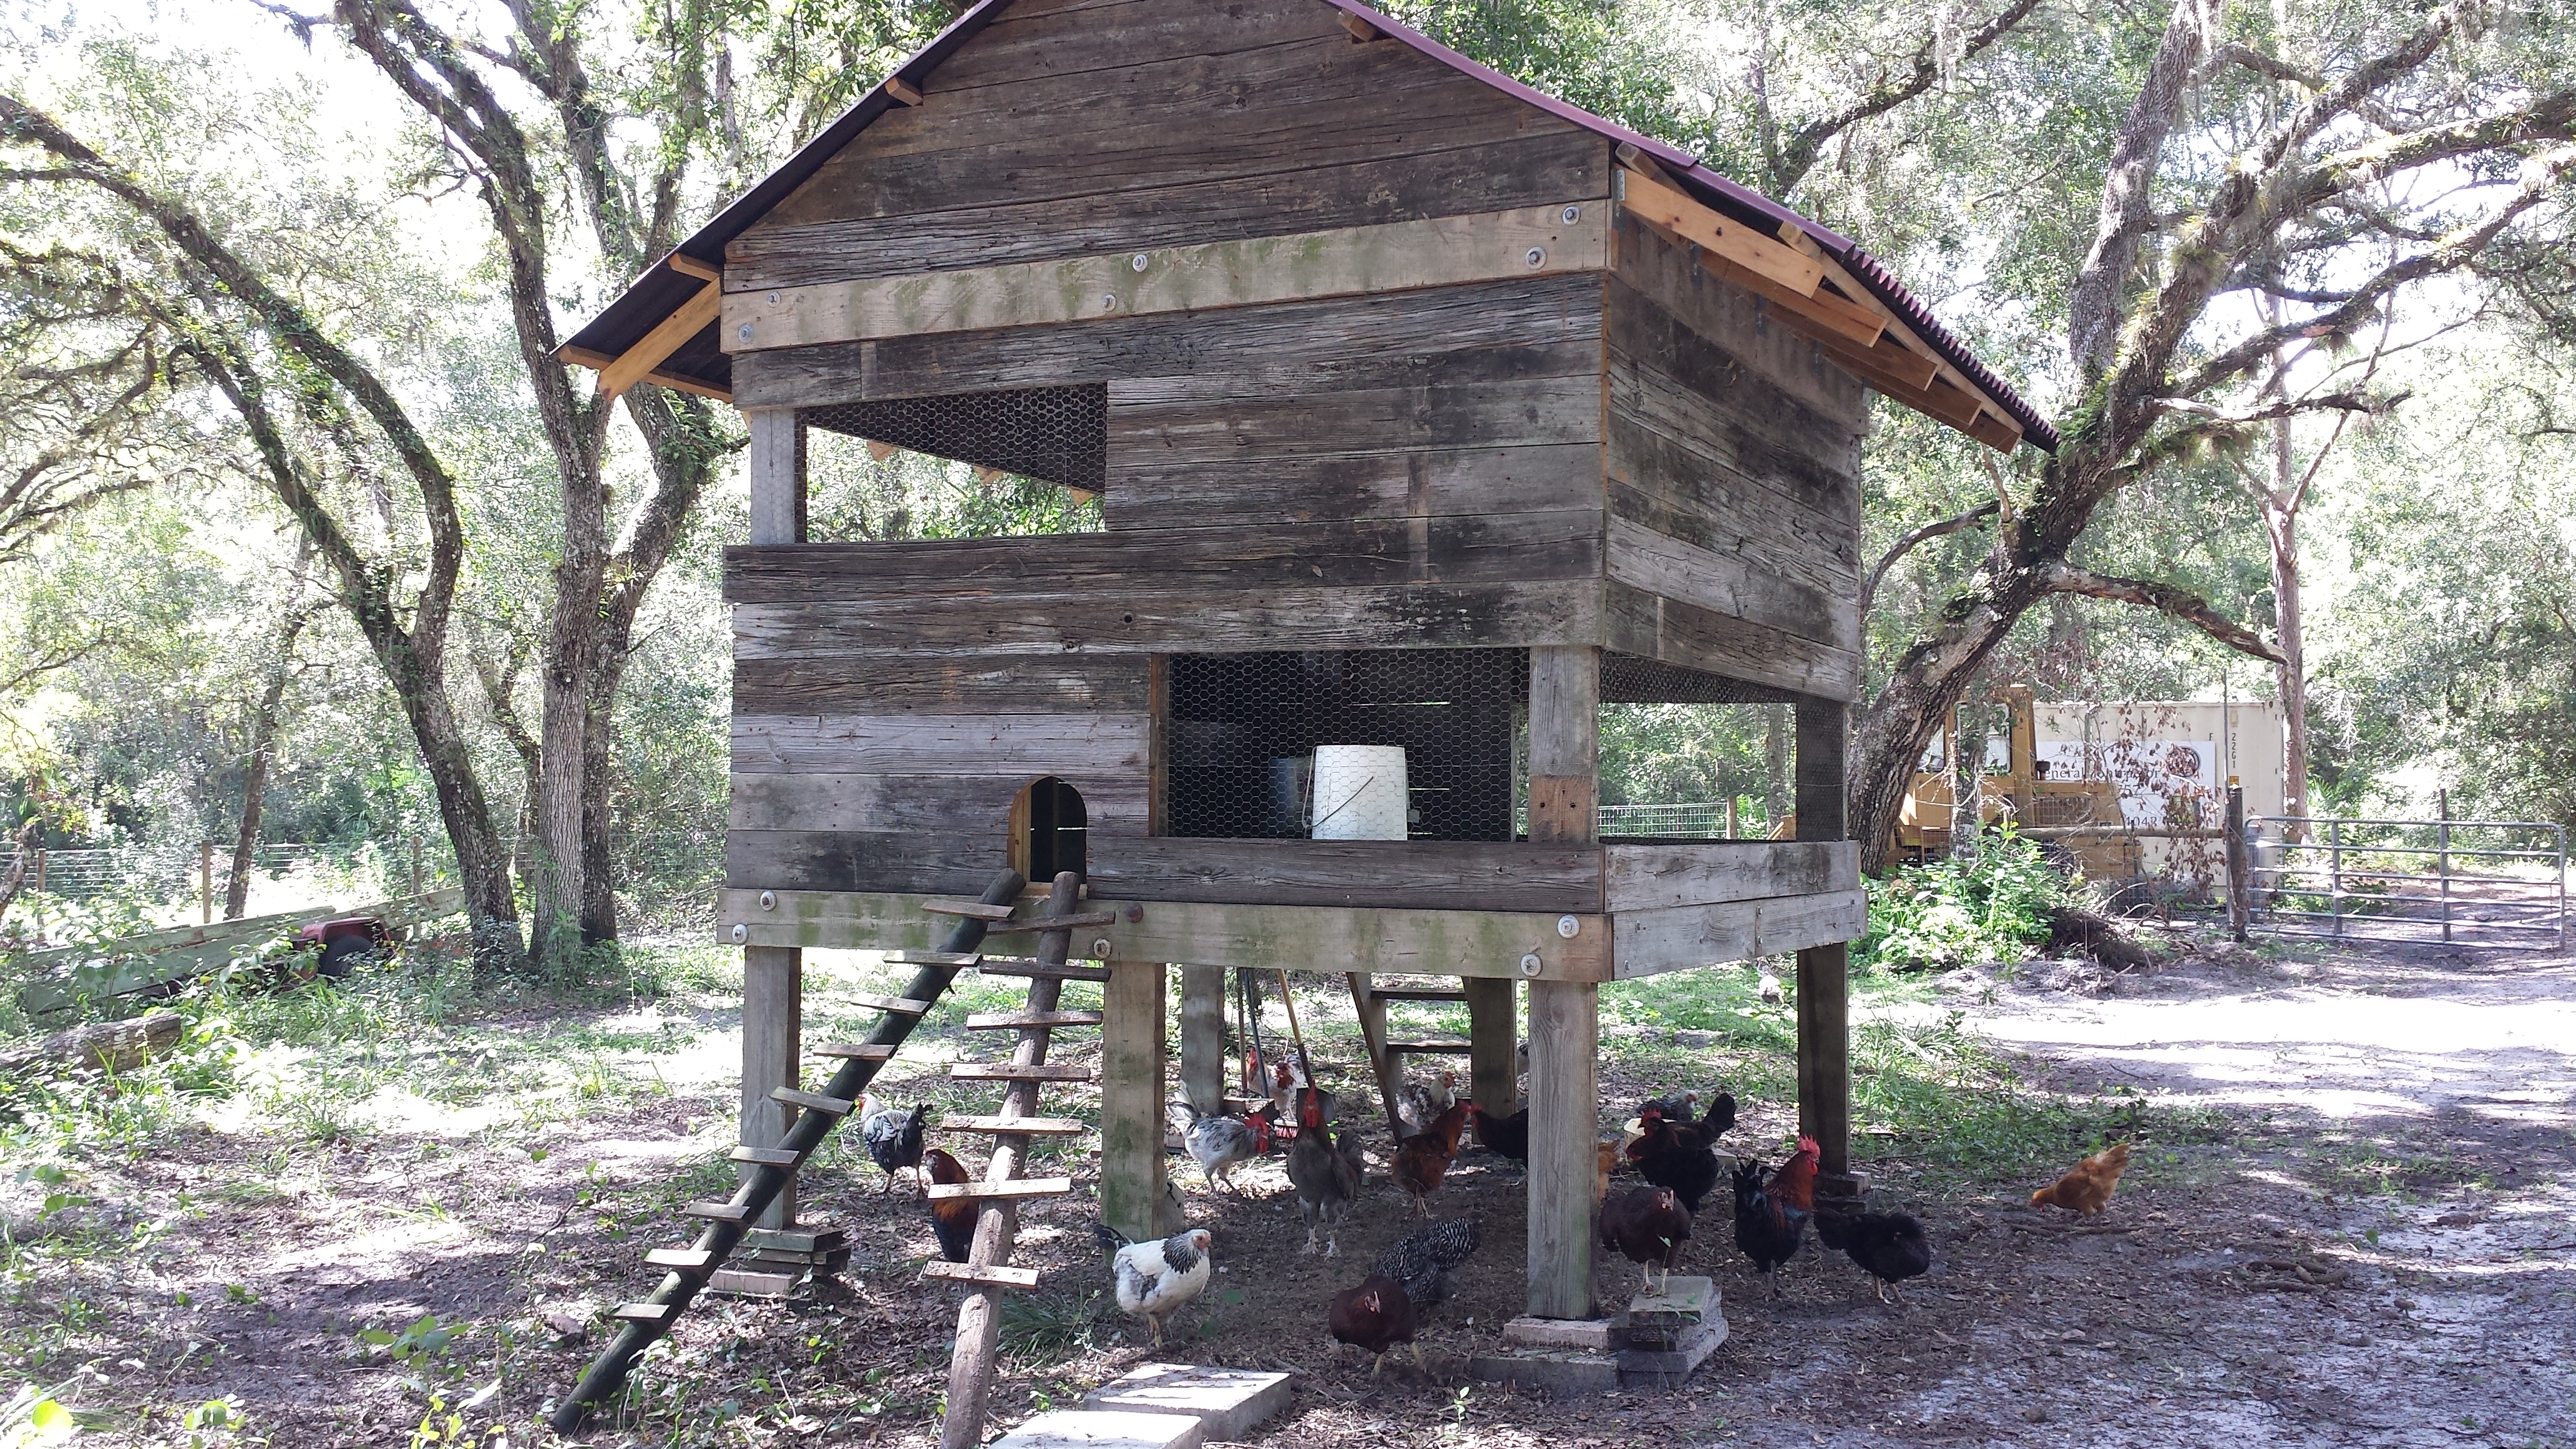 My Chicken Coop built from reclaimed wood. It took about 3 months to build and features a Brinsea automatic door opener, gravity feeders and about 2 dozen nesting boxes.